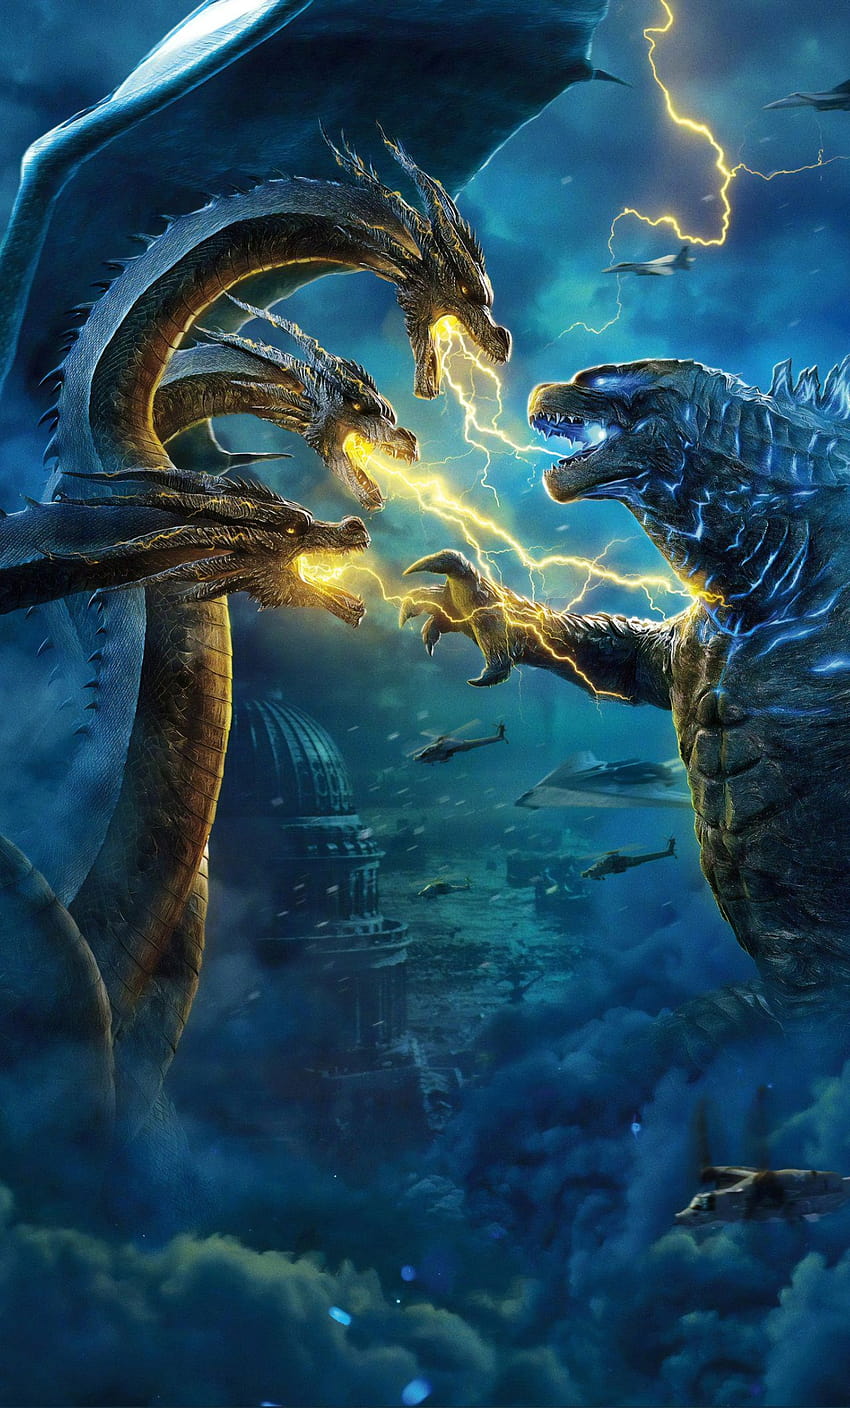 1280x2120 Godzilla King Of The Monsters iPhone , Hintergründe und Godzilla iphone HD-Handy-Hintergrundbild